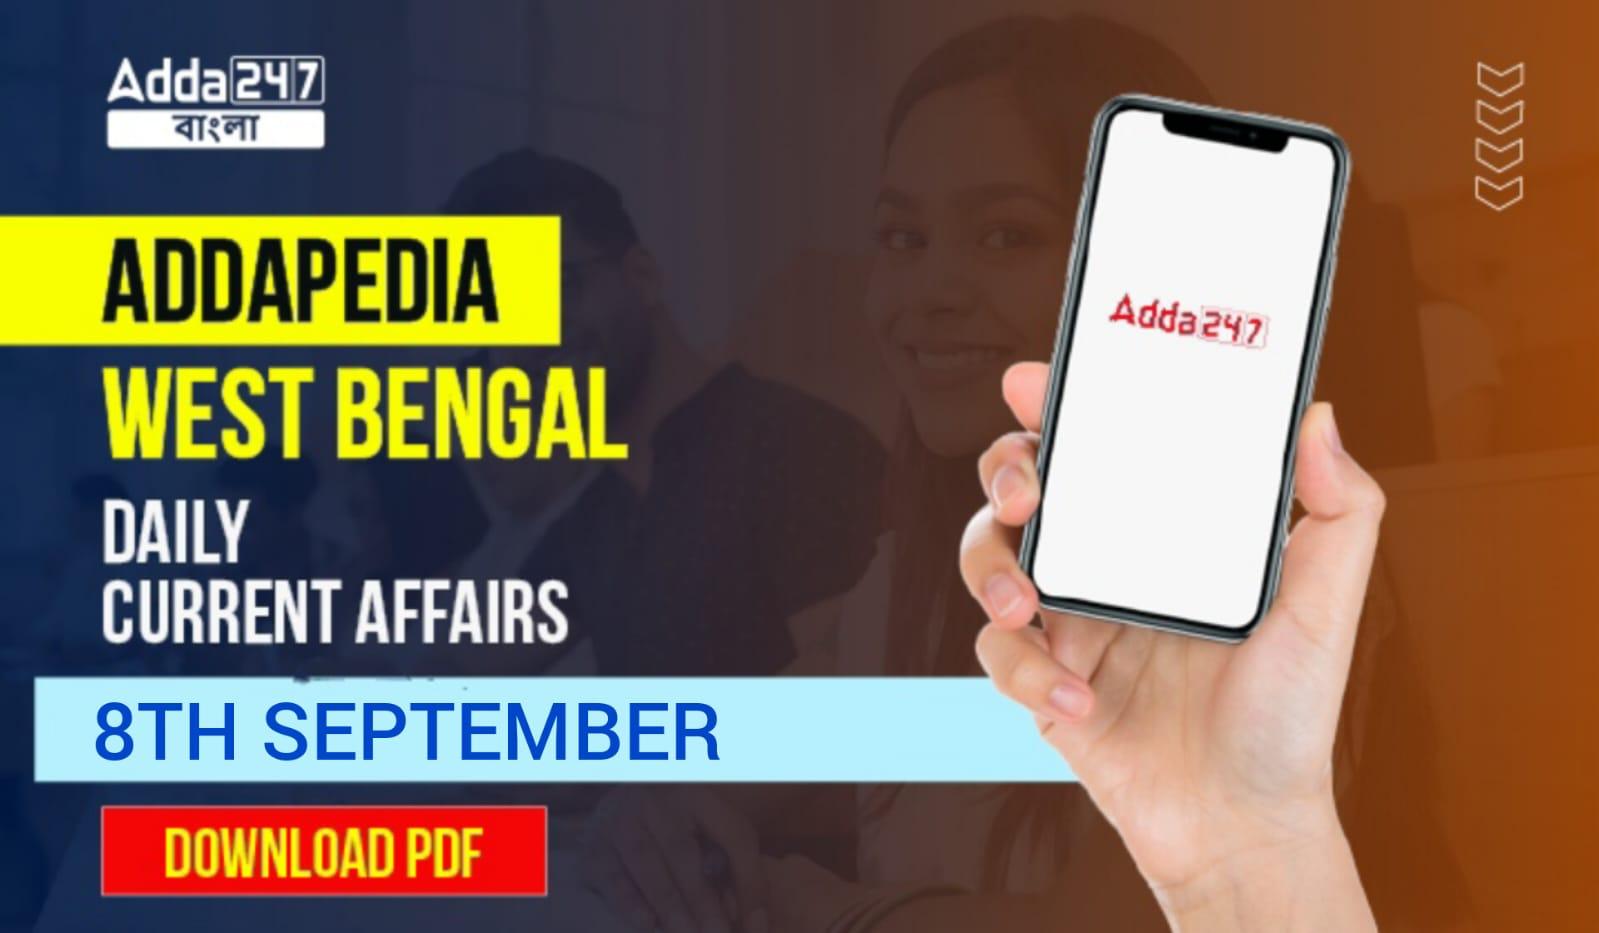 ADDAPEDIA West Bengal- Daily Current Affairs 8th September